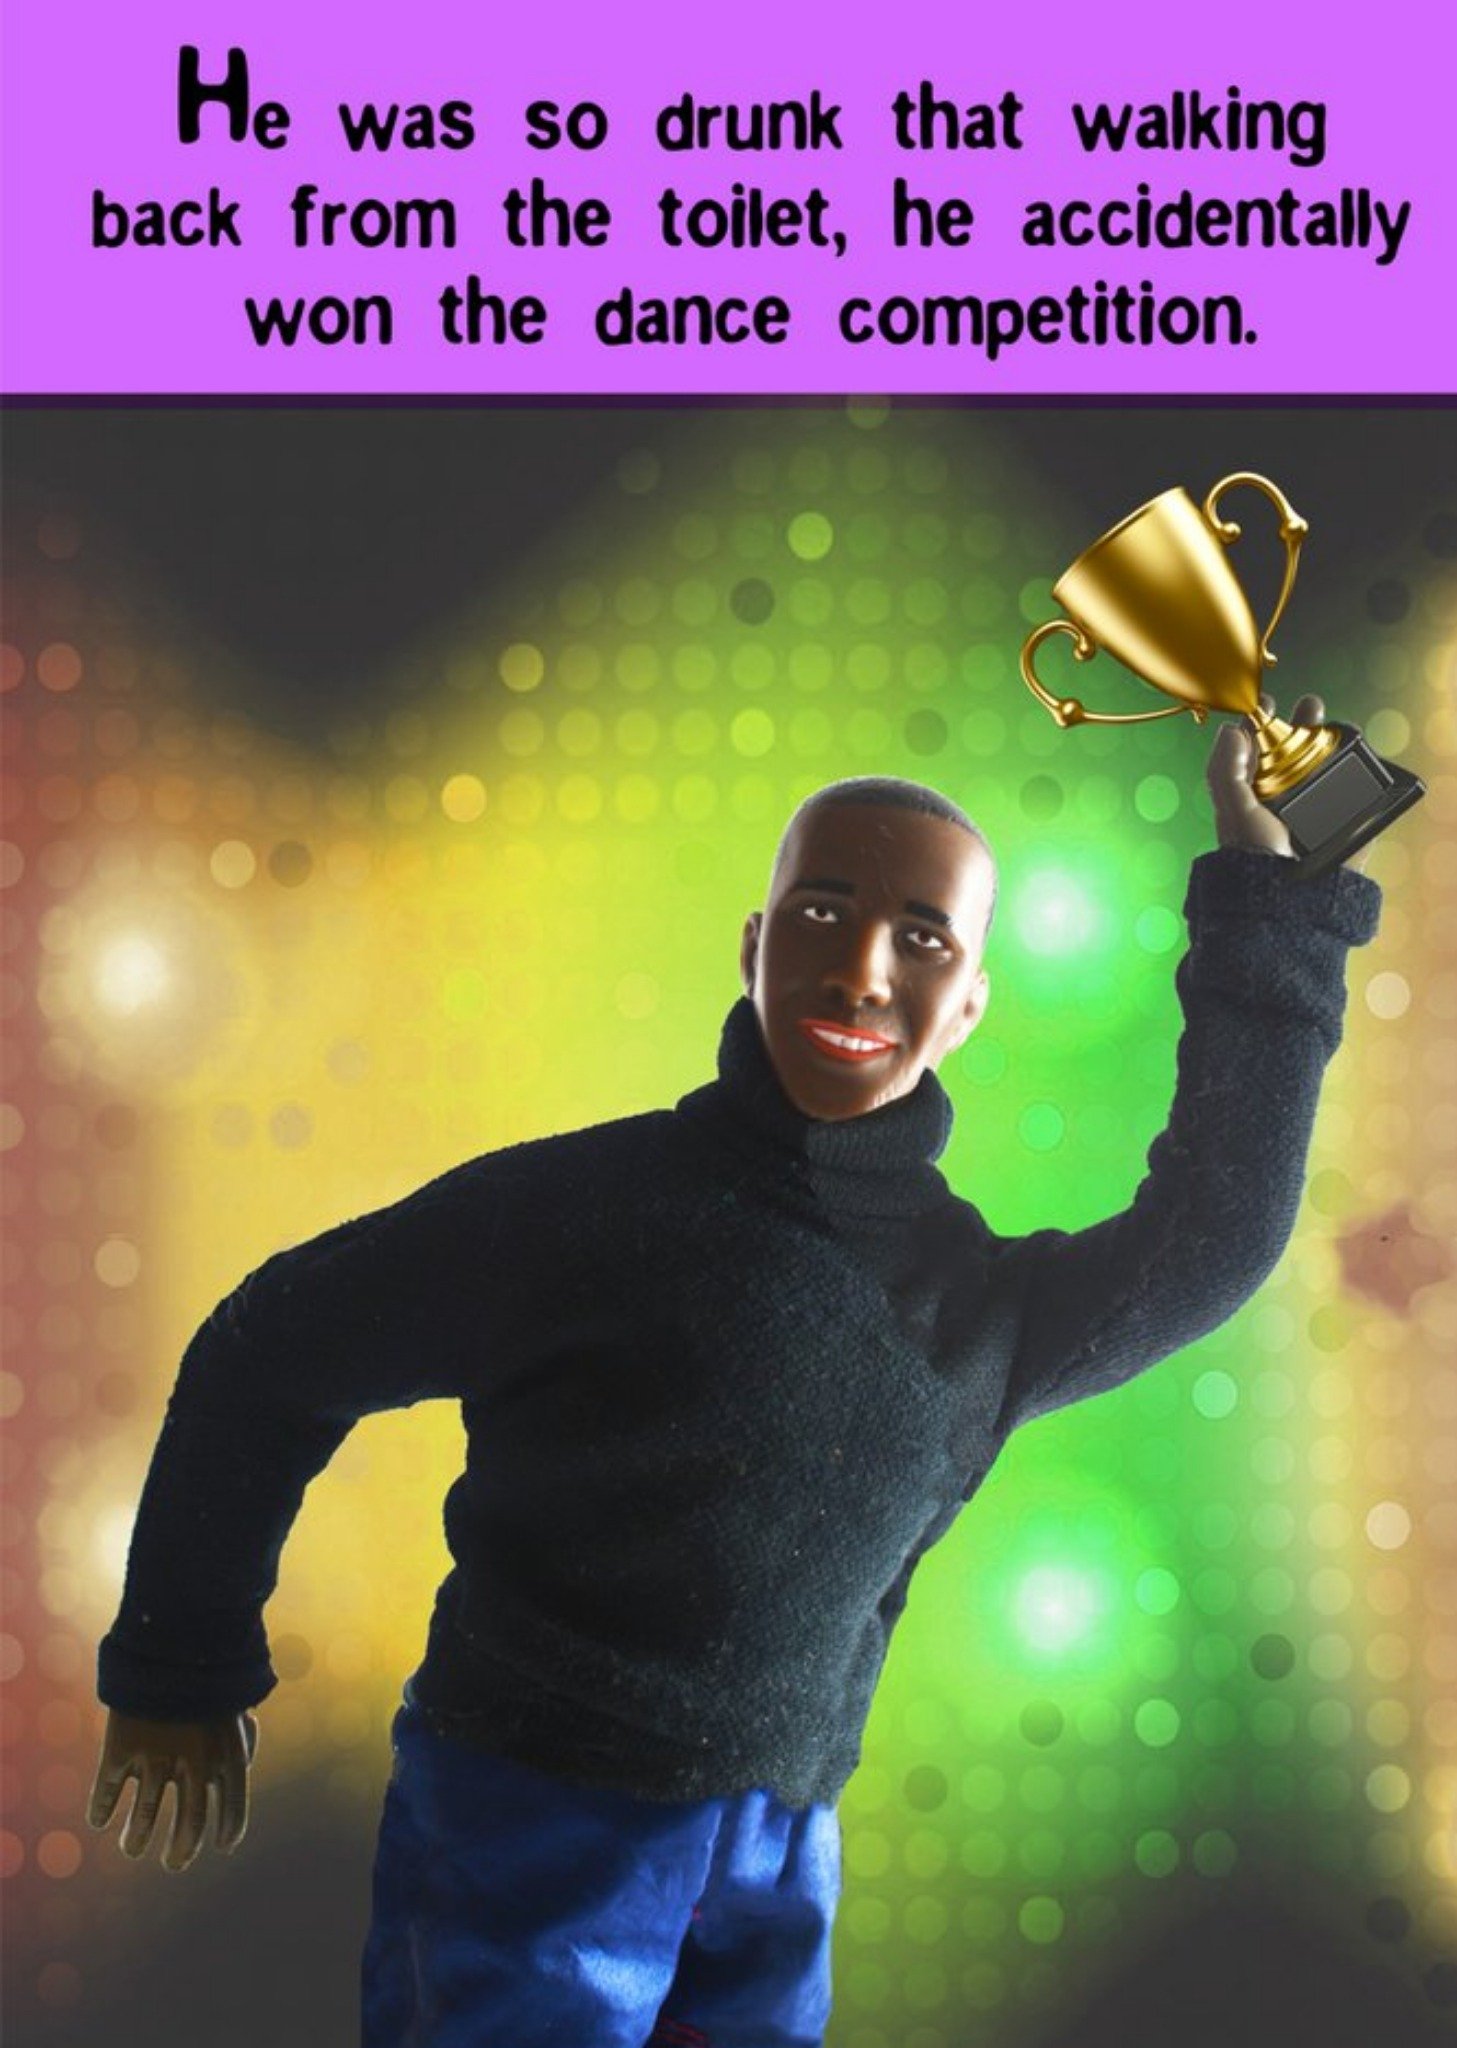 Go La La Funny He Was So Drunk He Accidentally Won The Dance Competition Card Ecard